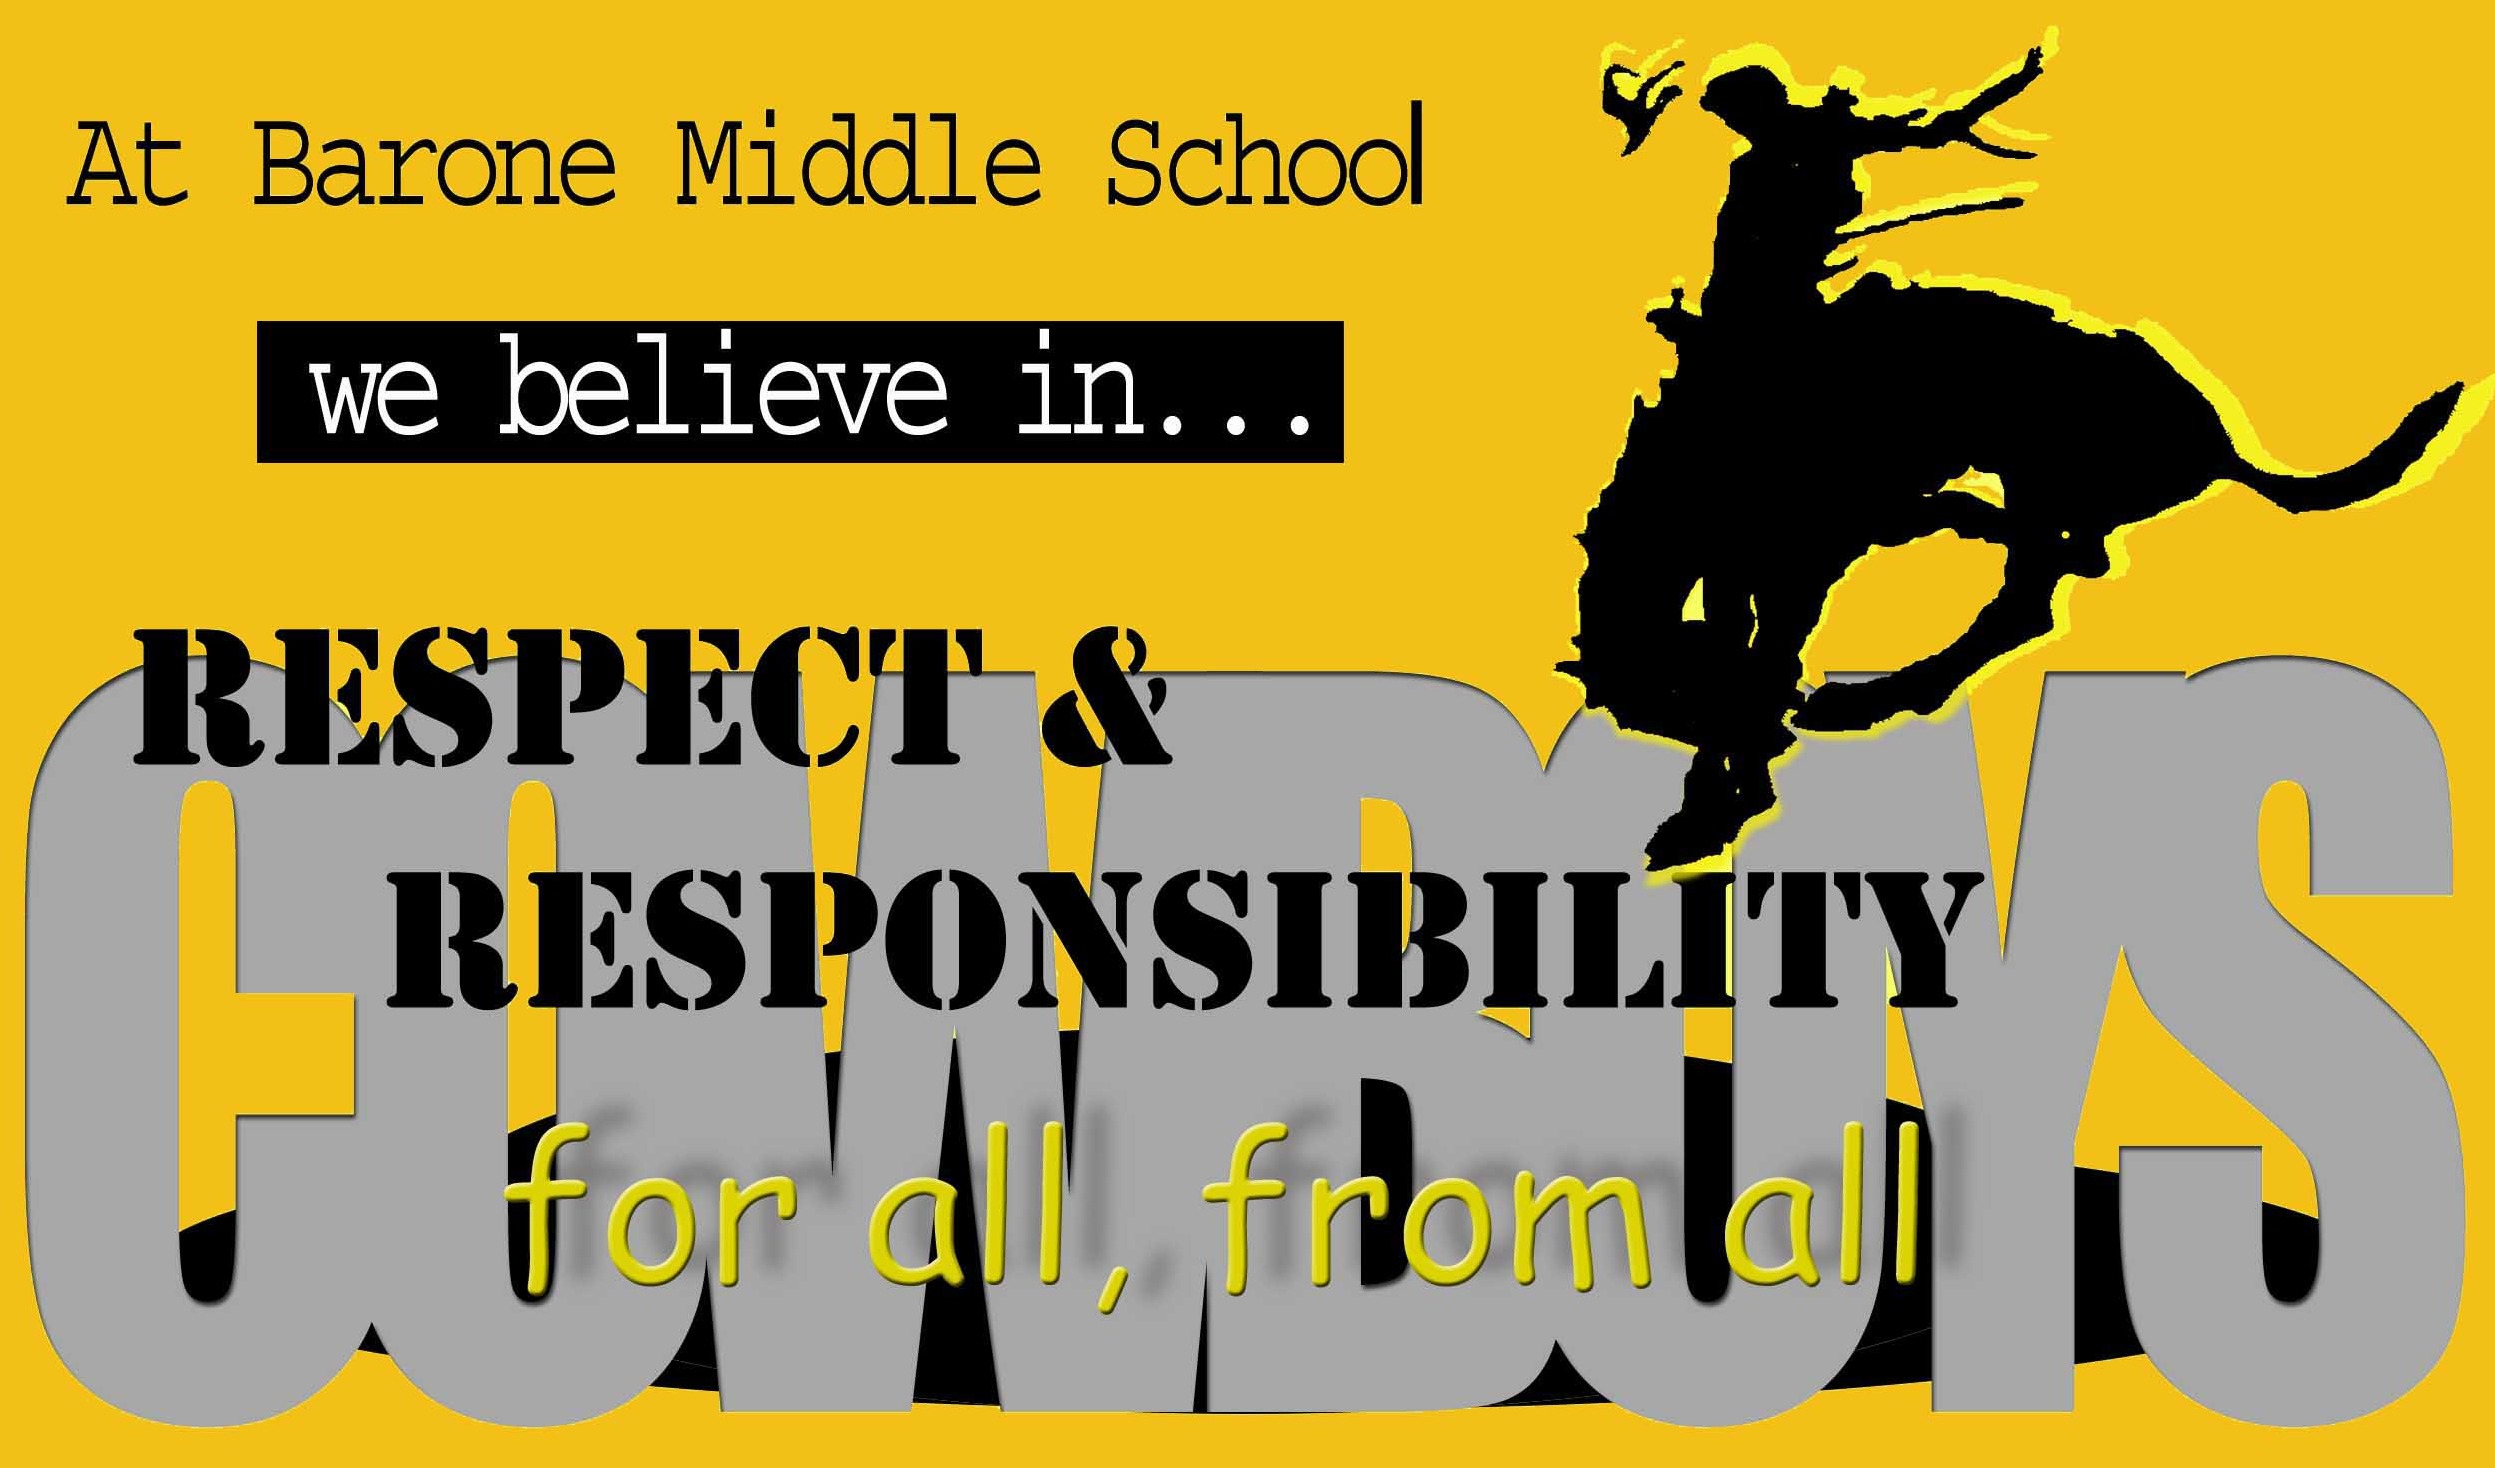 At barone middle school, we believe in respect and responsibility for all, from all. 